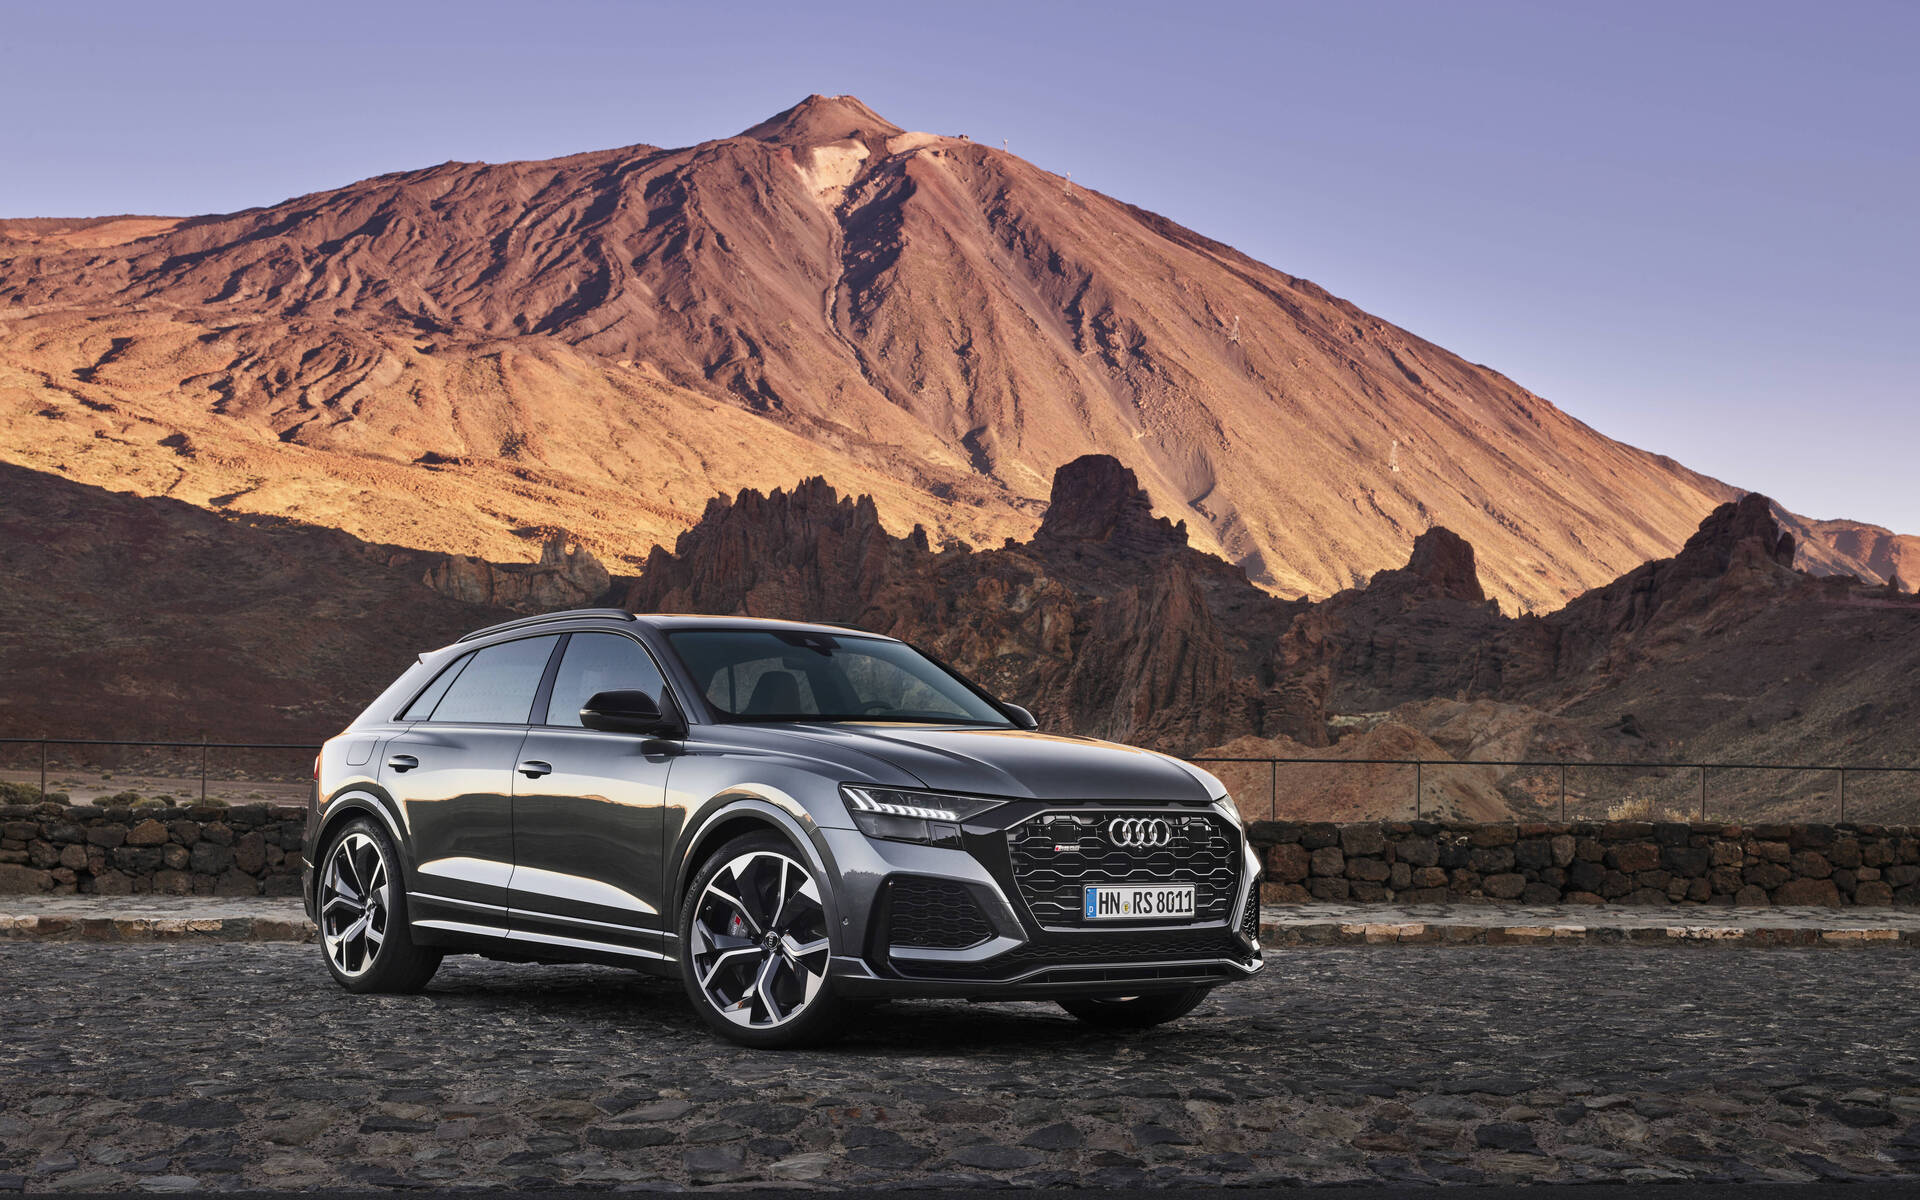 2022 Audi Q8 - News, reviews, picture galleries and videos - The Car Guide